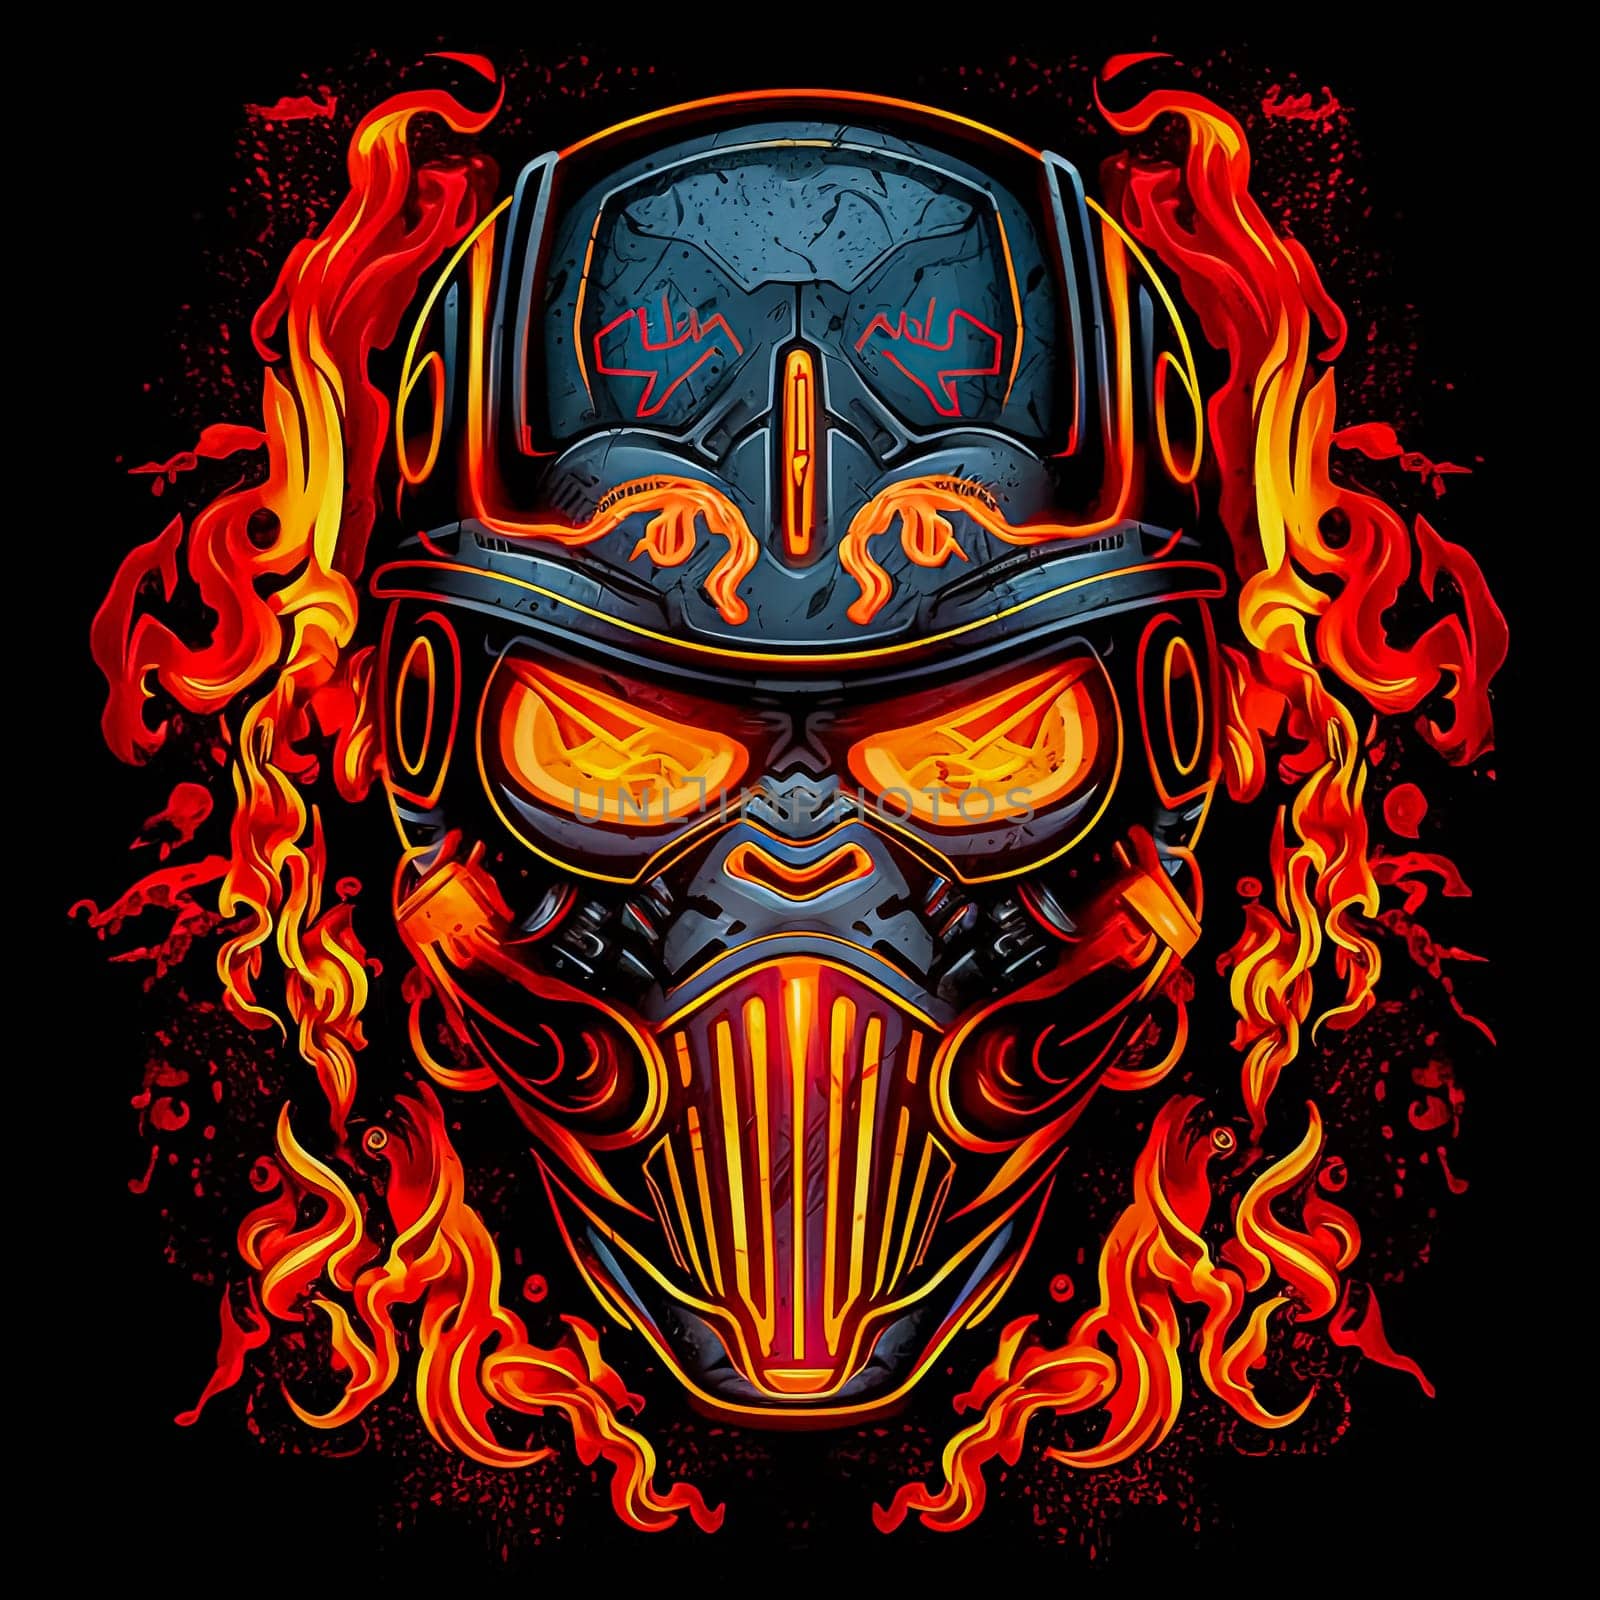 A skull with red and blue colors and a red flame on the right side. The skull is wearing headphones and has a red eye. Scene is dark and futuristic